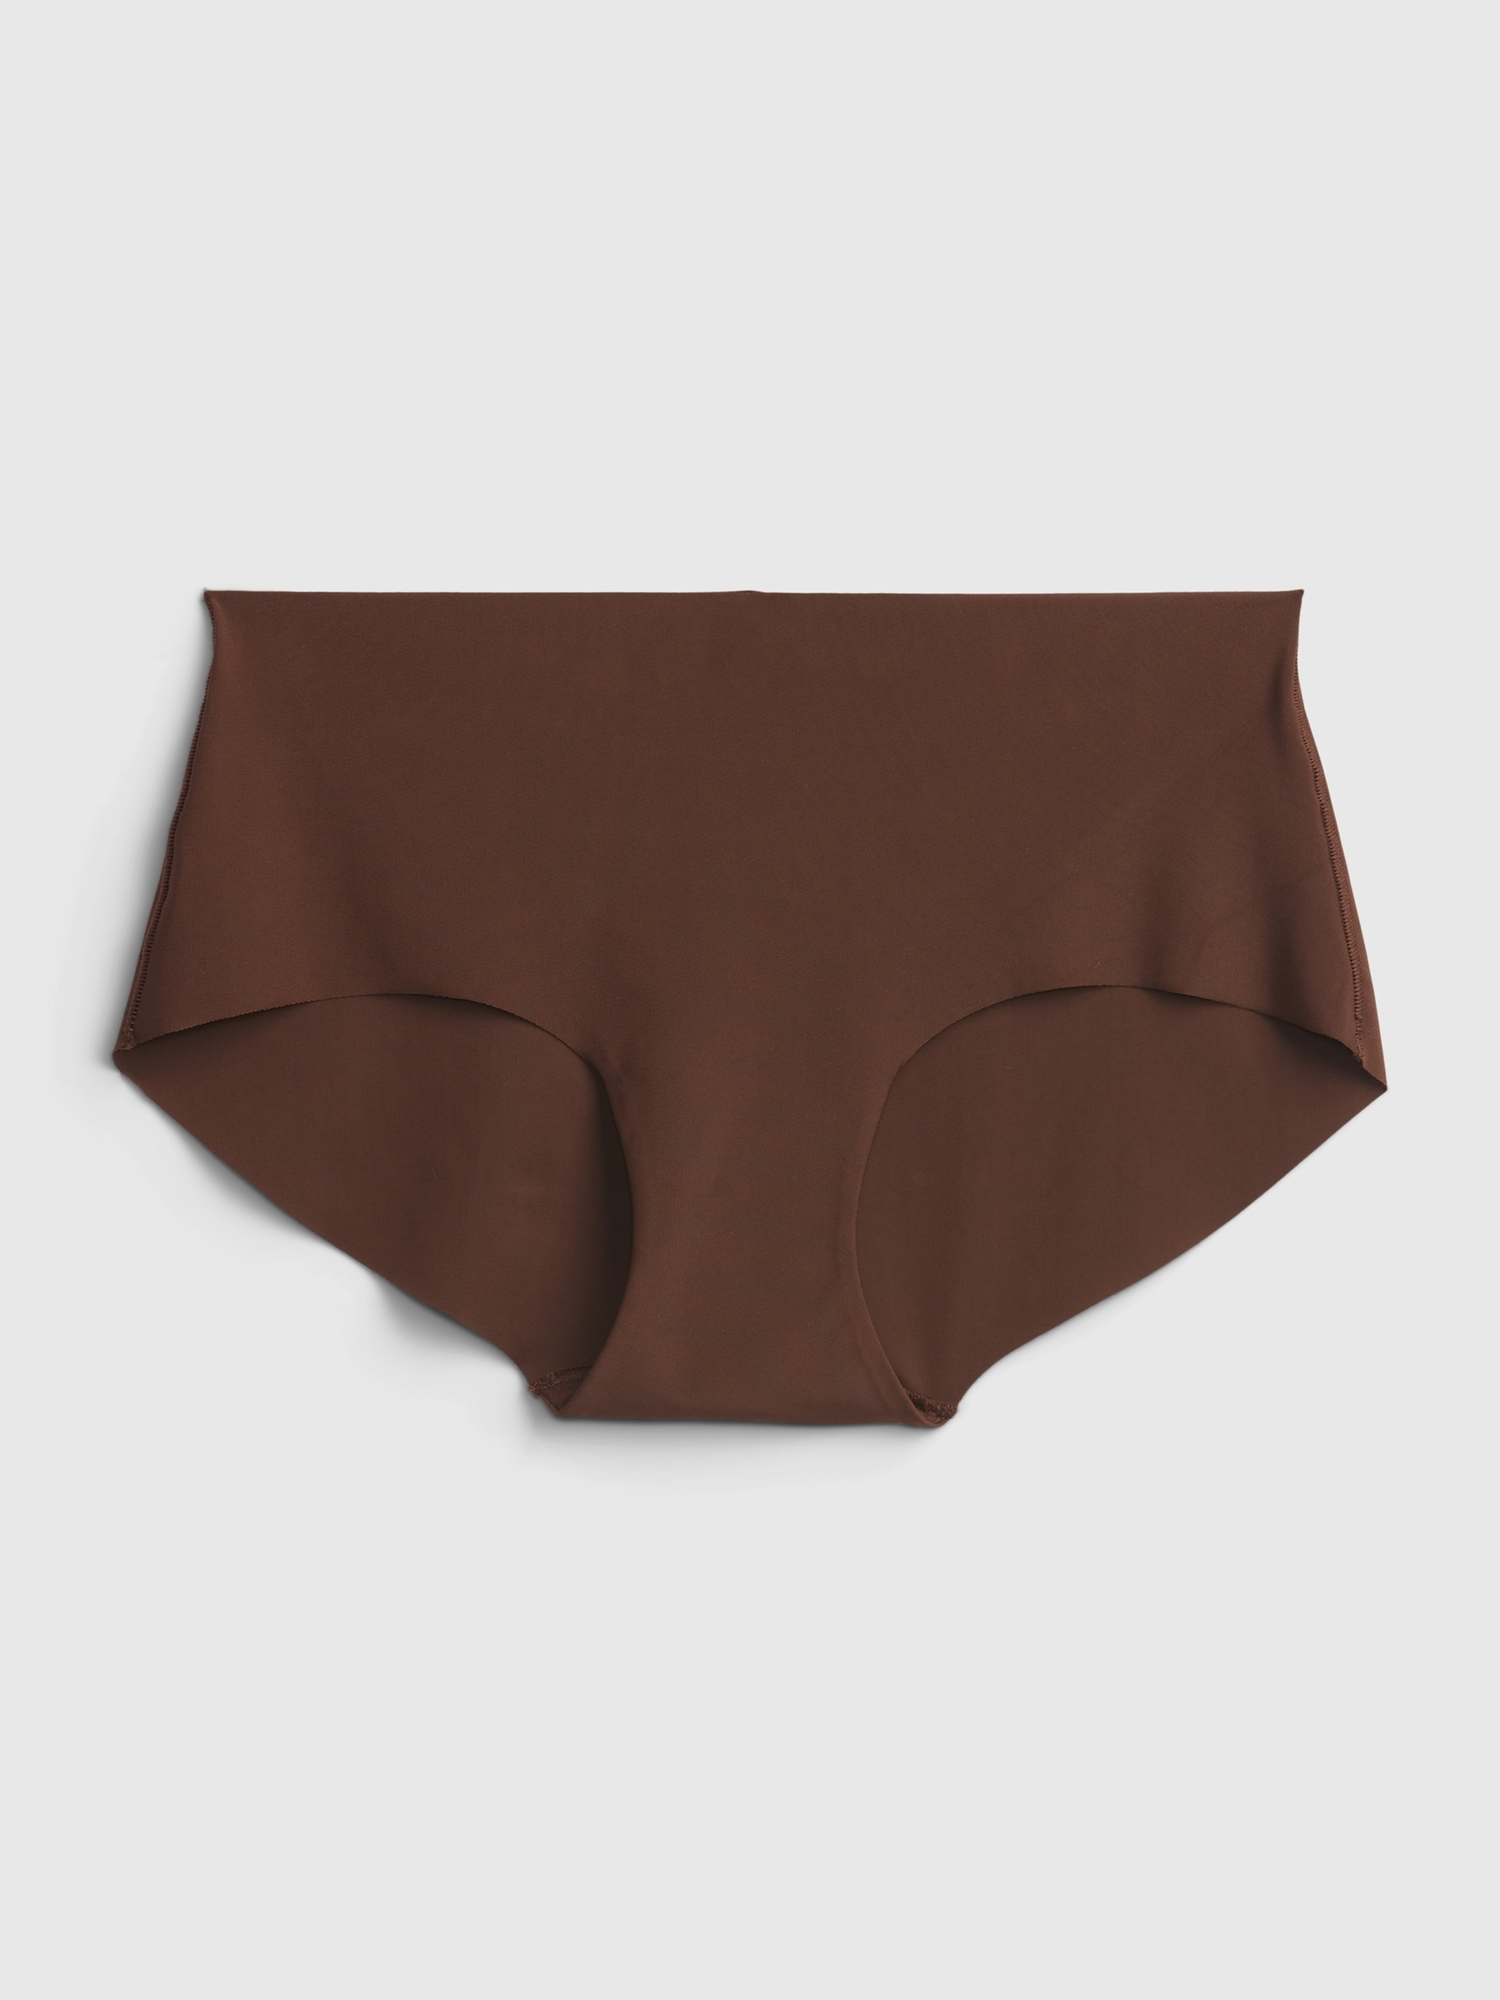 Put on Seamless Underwear To Prevent Panty Lines at the Holiday Party -  21Ninety